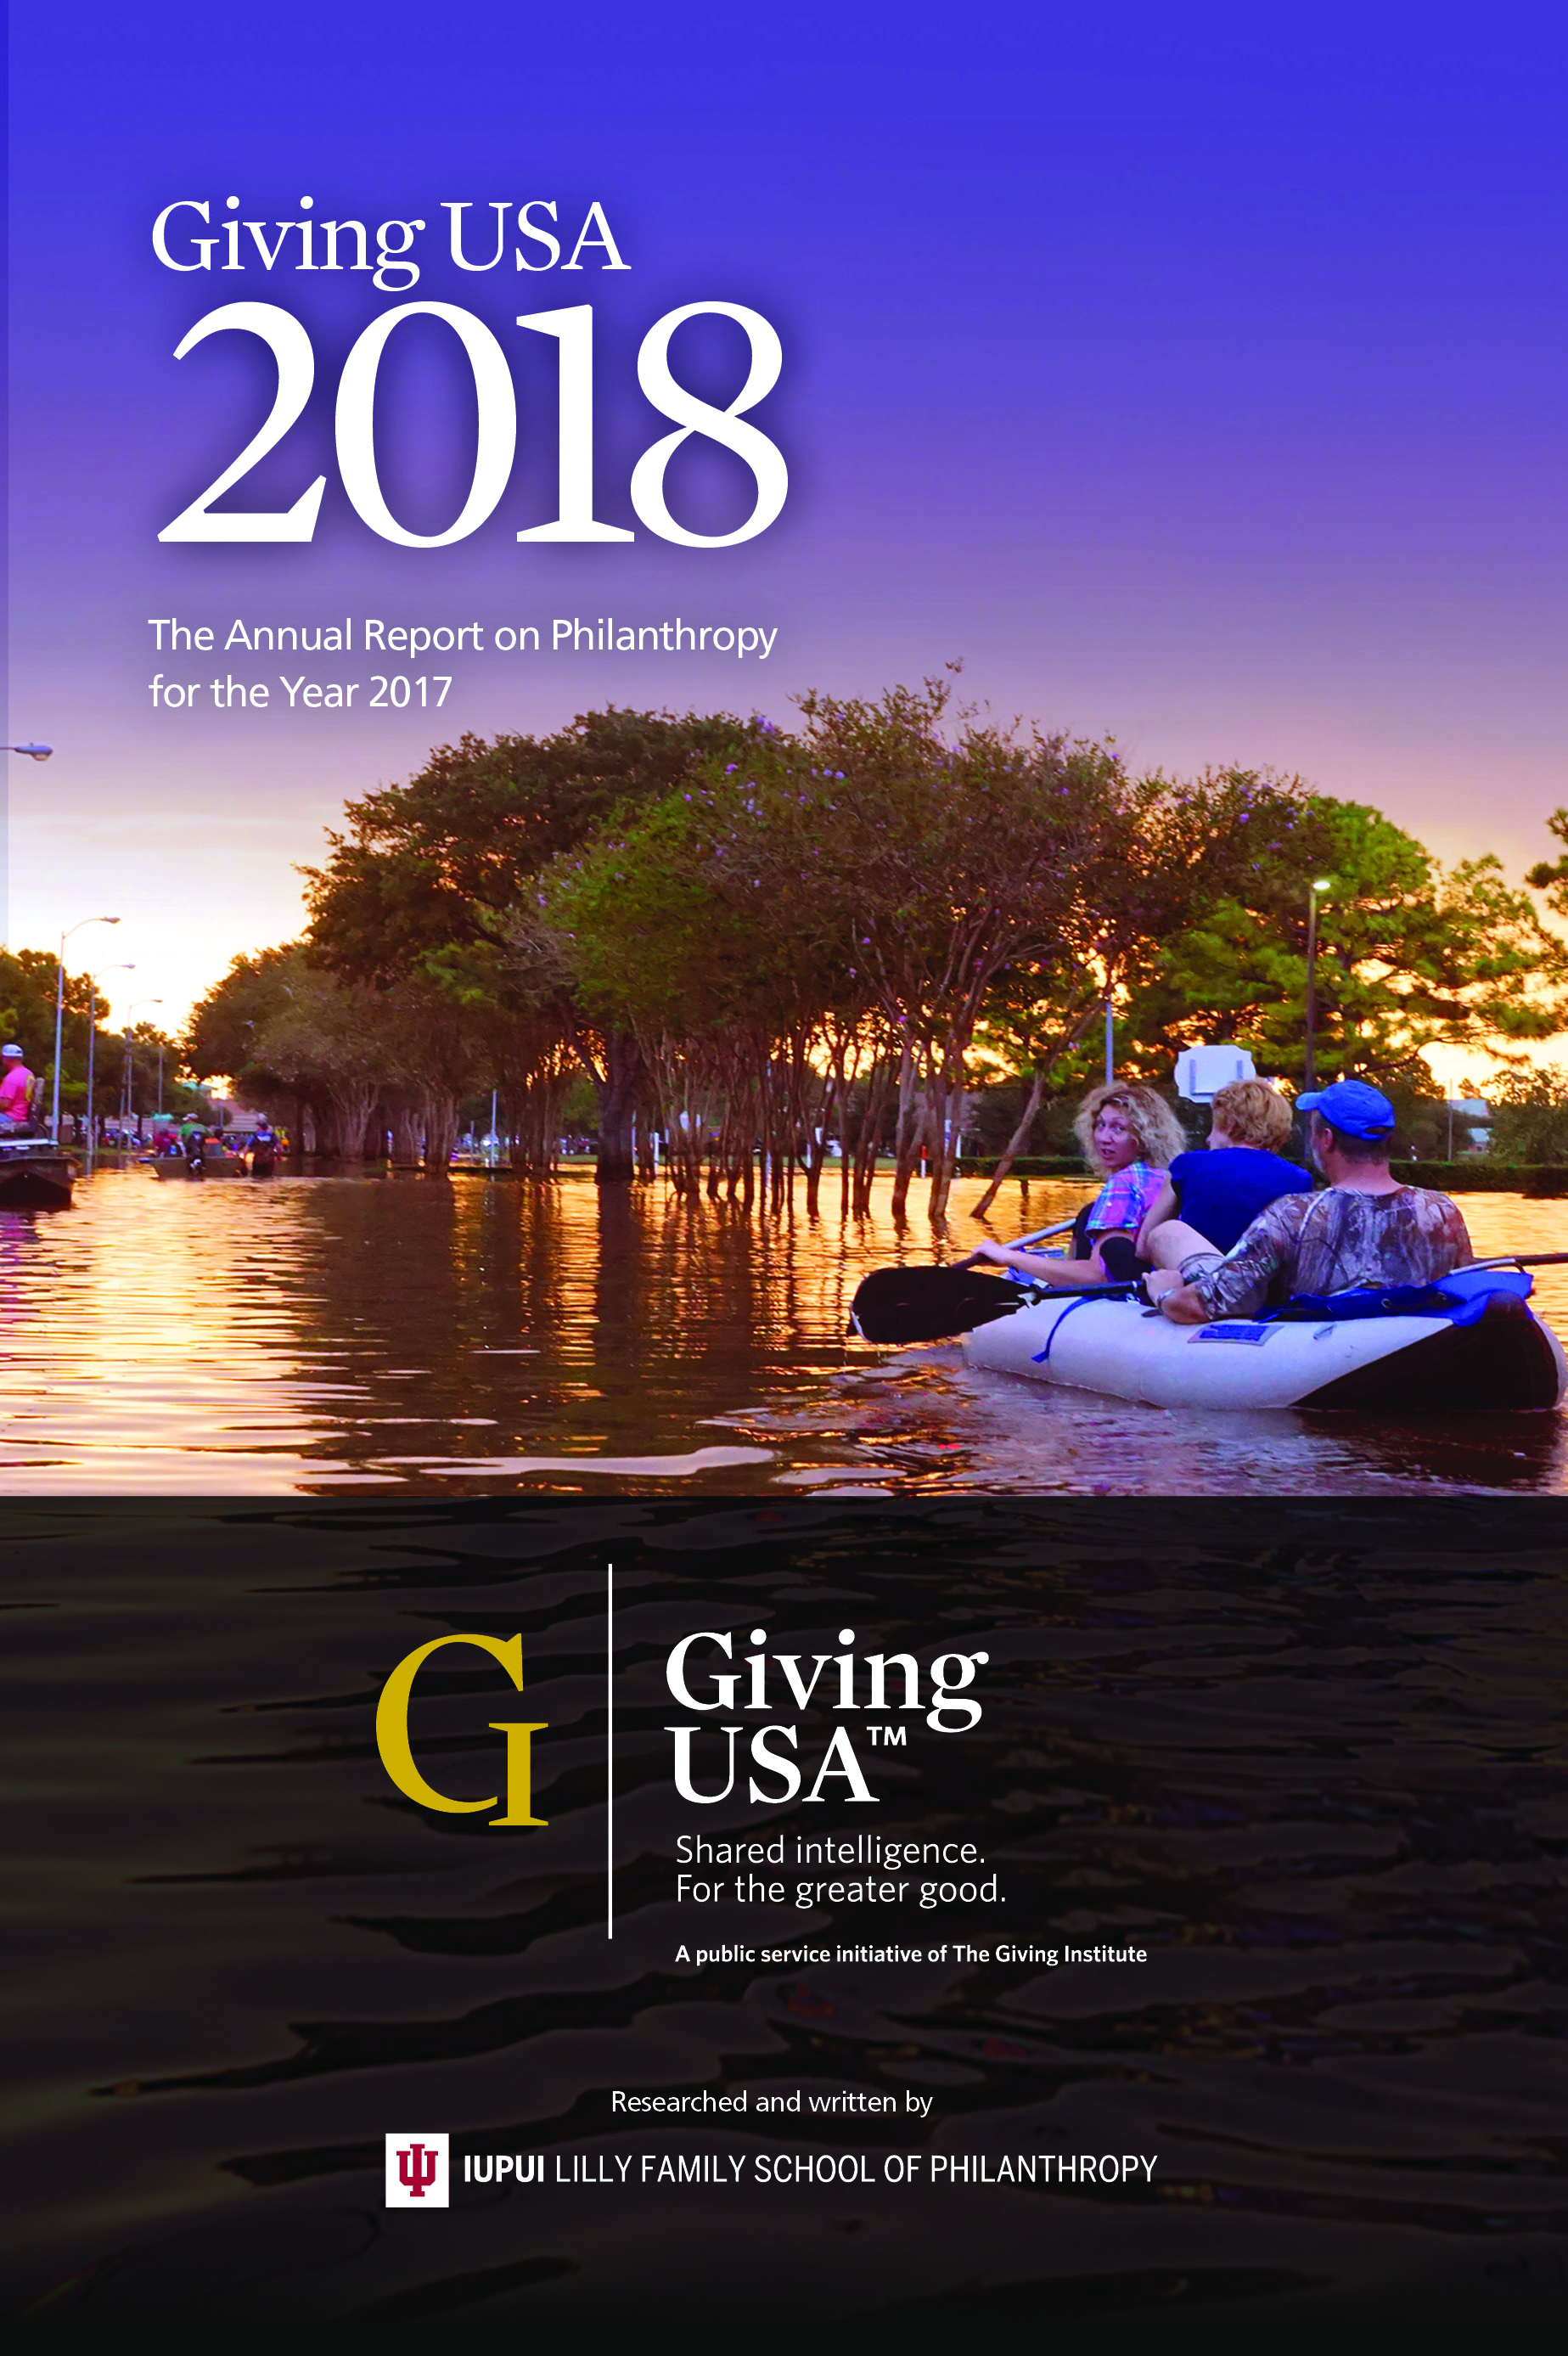 Insights And Trends From The Giving USA 2018 Report 4770